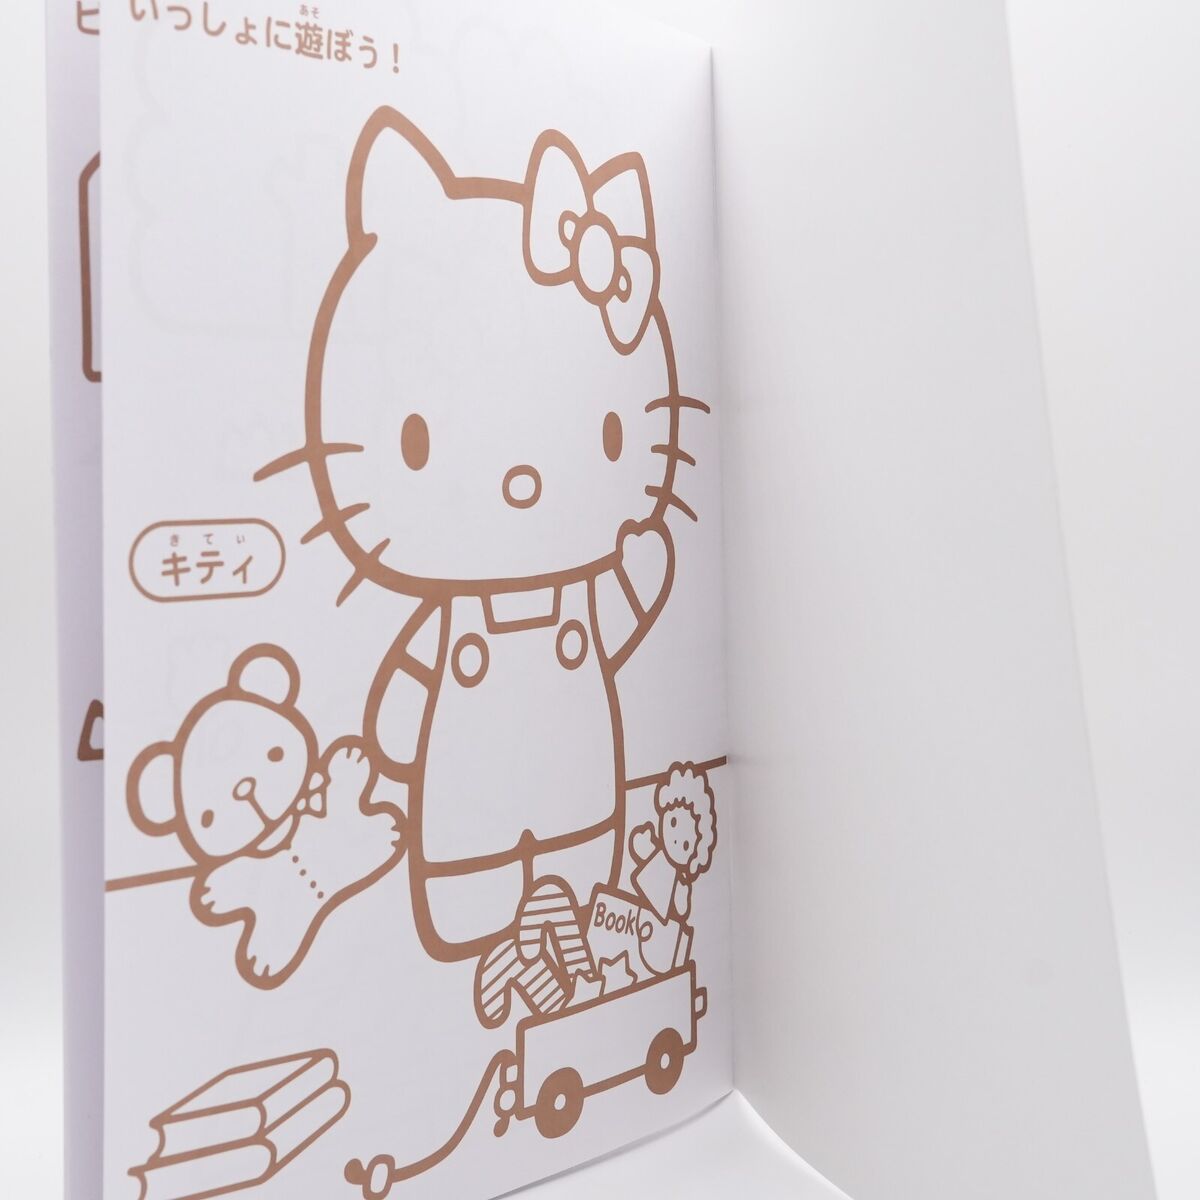 Sanrio hello kitty coloring book nurie pages cm x cm made in japan